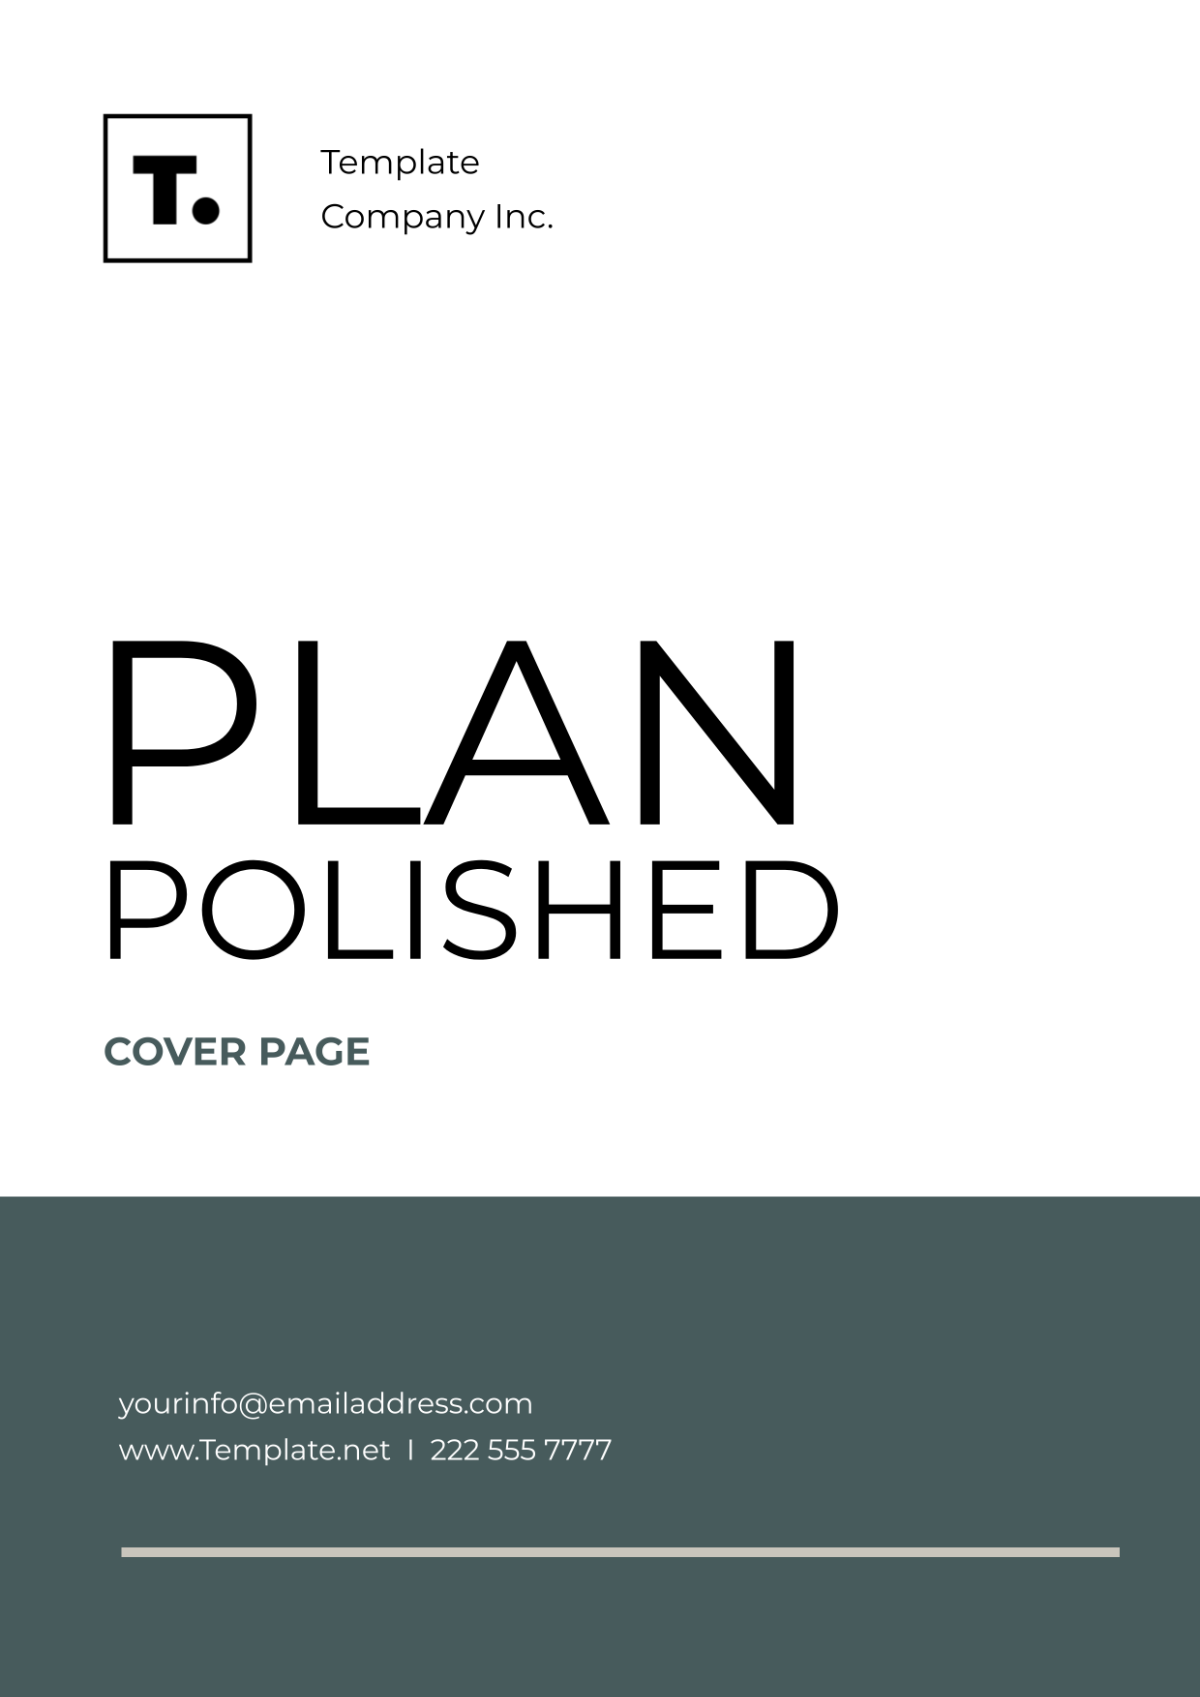 Plan Polished Cover Page Template